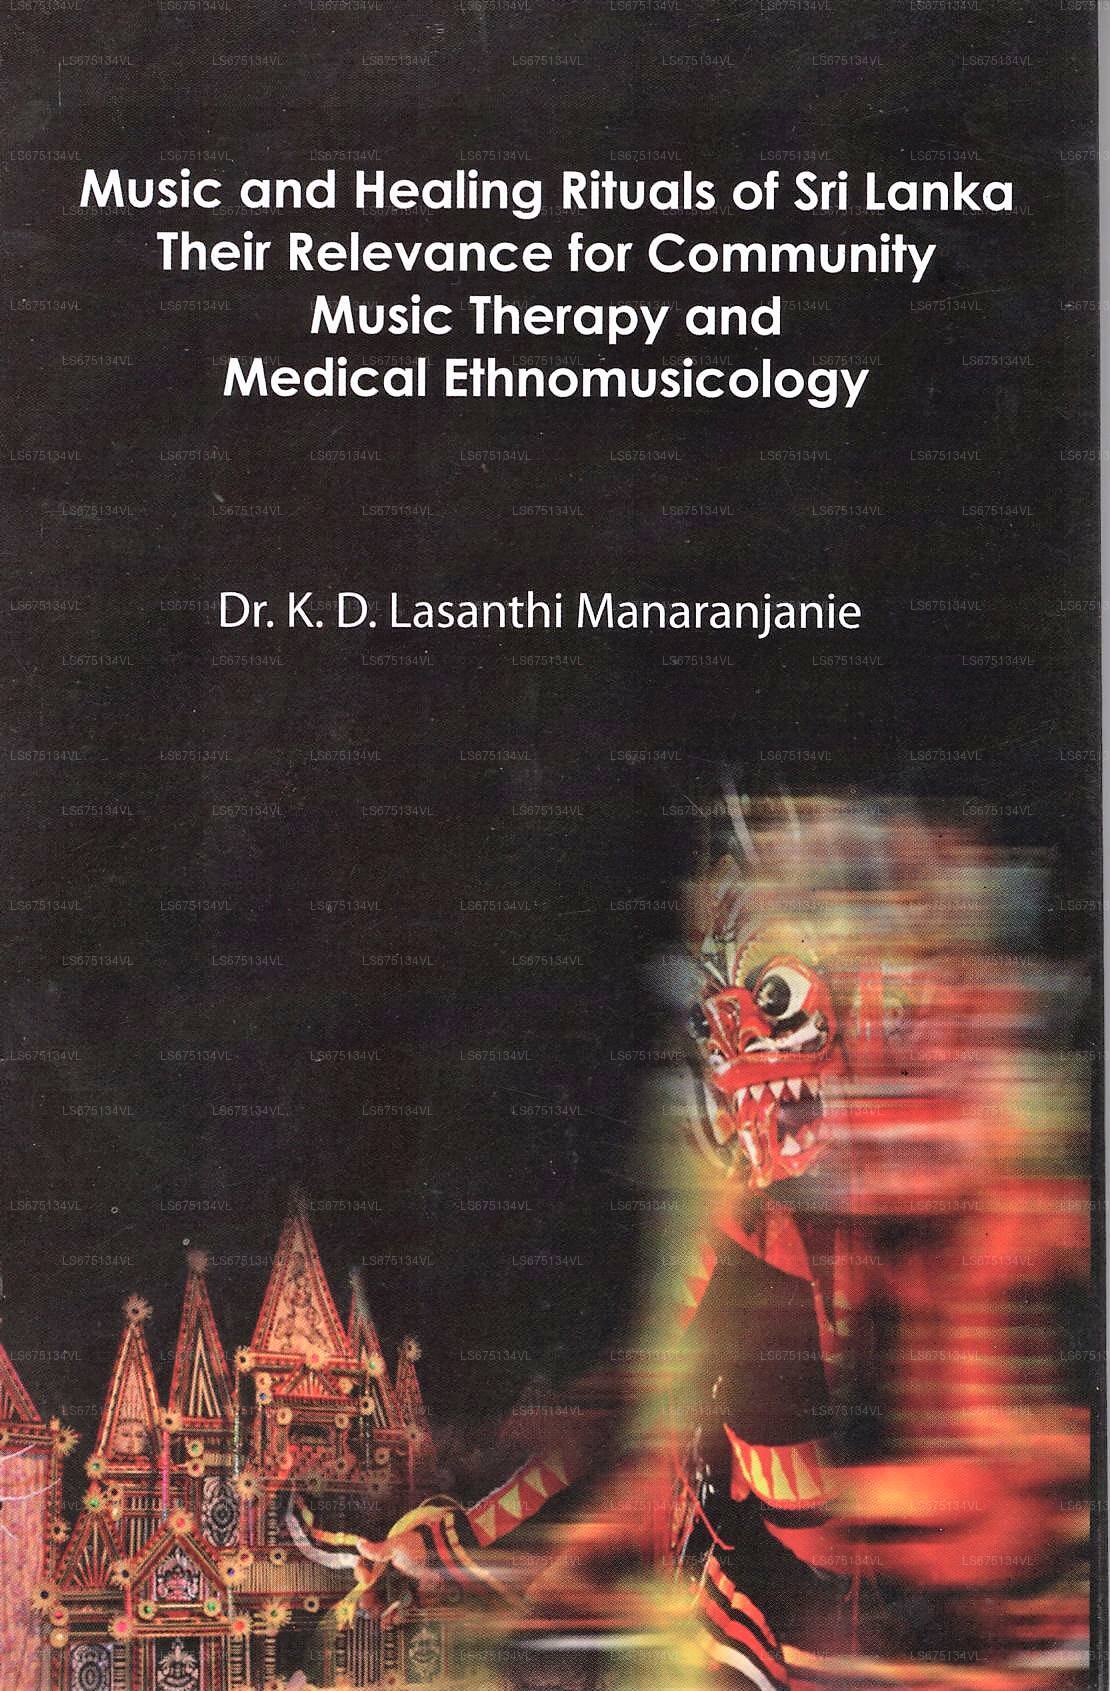 Music and Healing Rituals of Sri Lanka (Their Relevance For Community Music Therapy and Medical Ethn